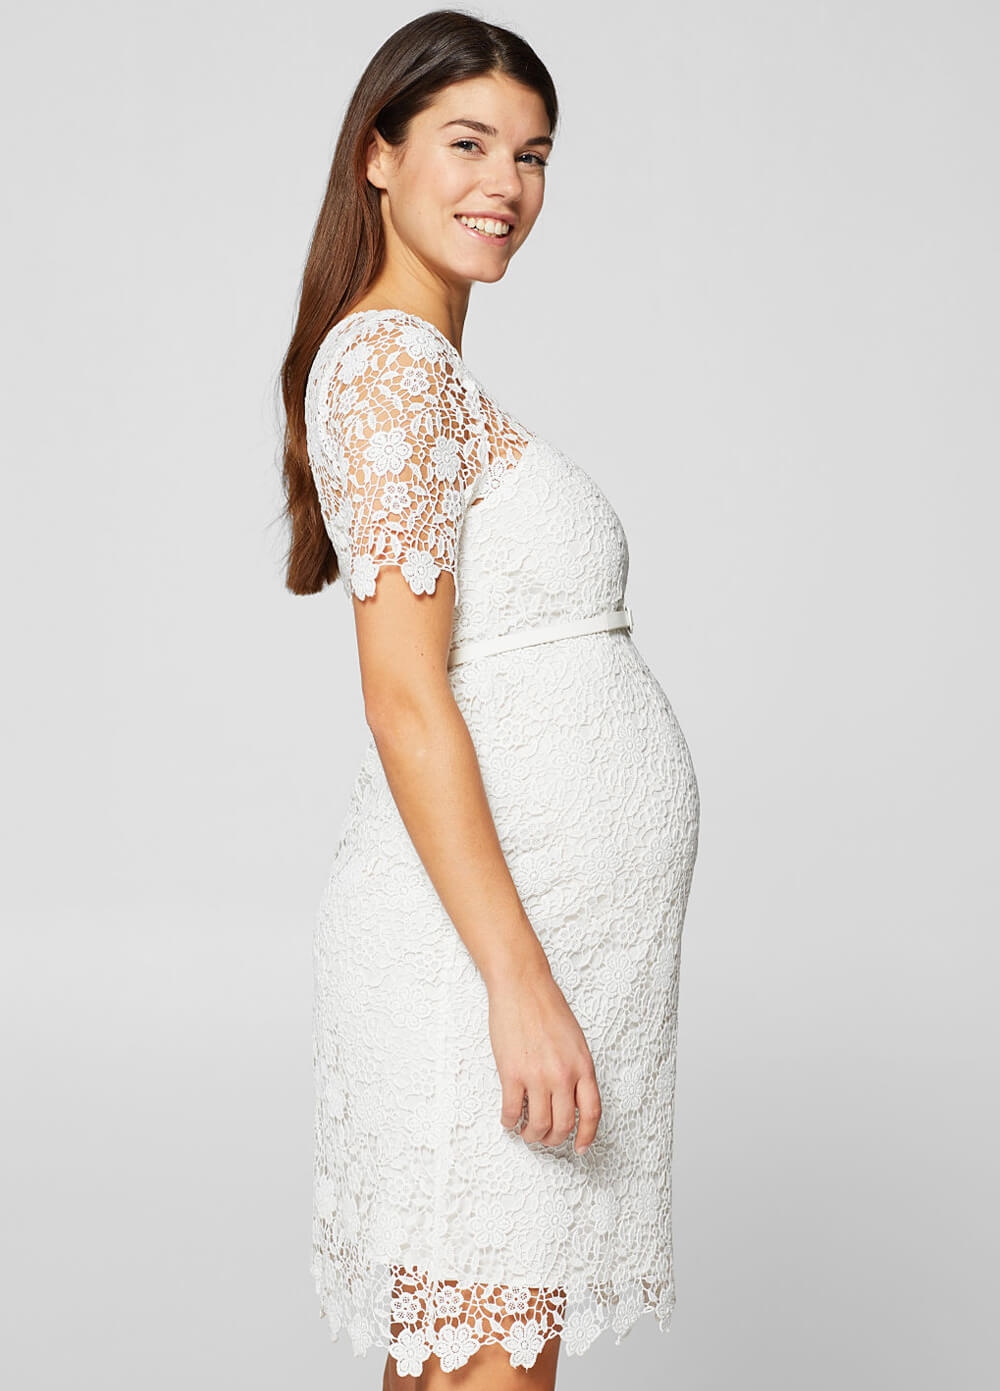 Esprit White Lace Occasion Maternity Dress w Belt | Queen Bee